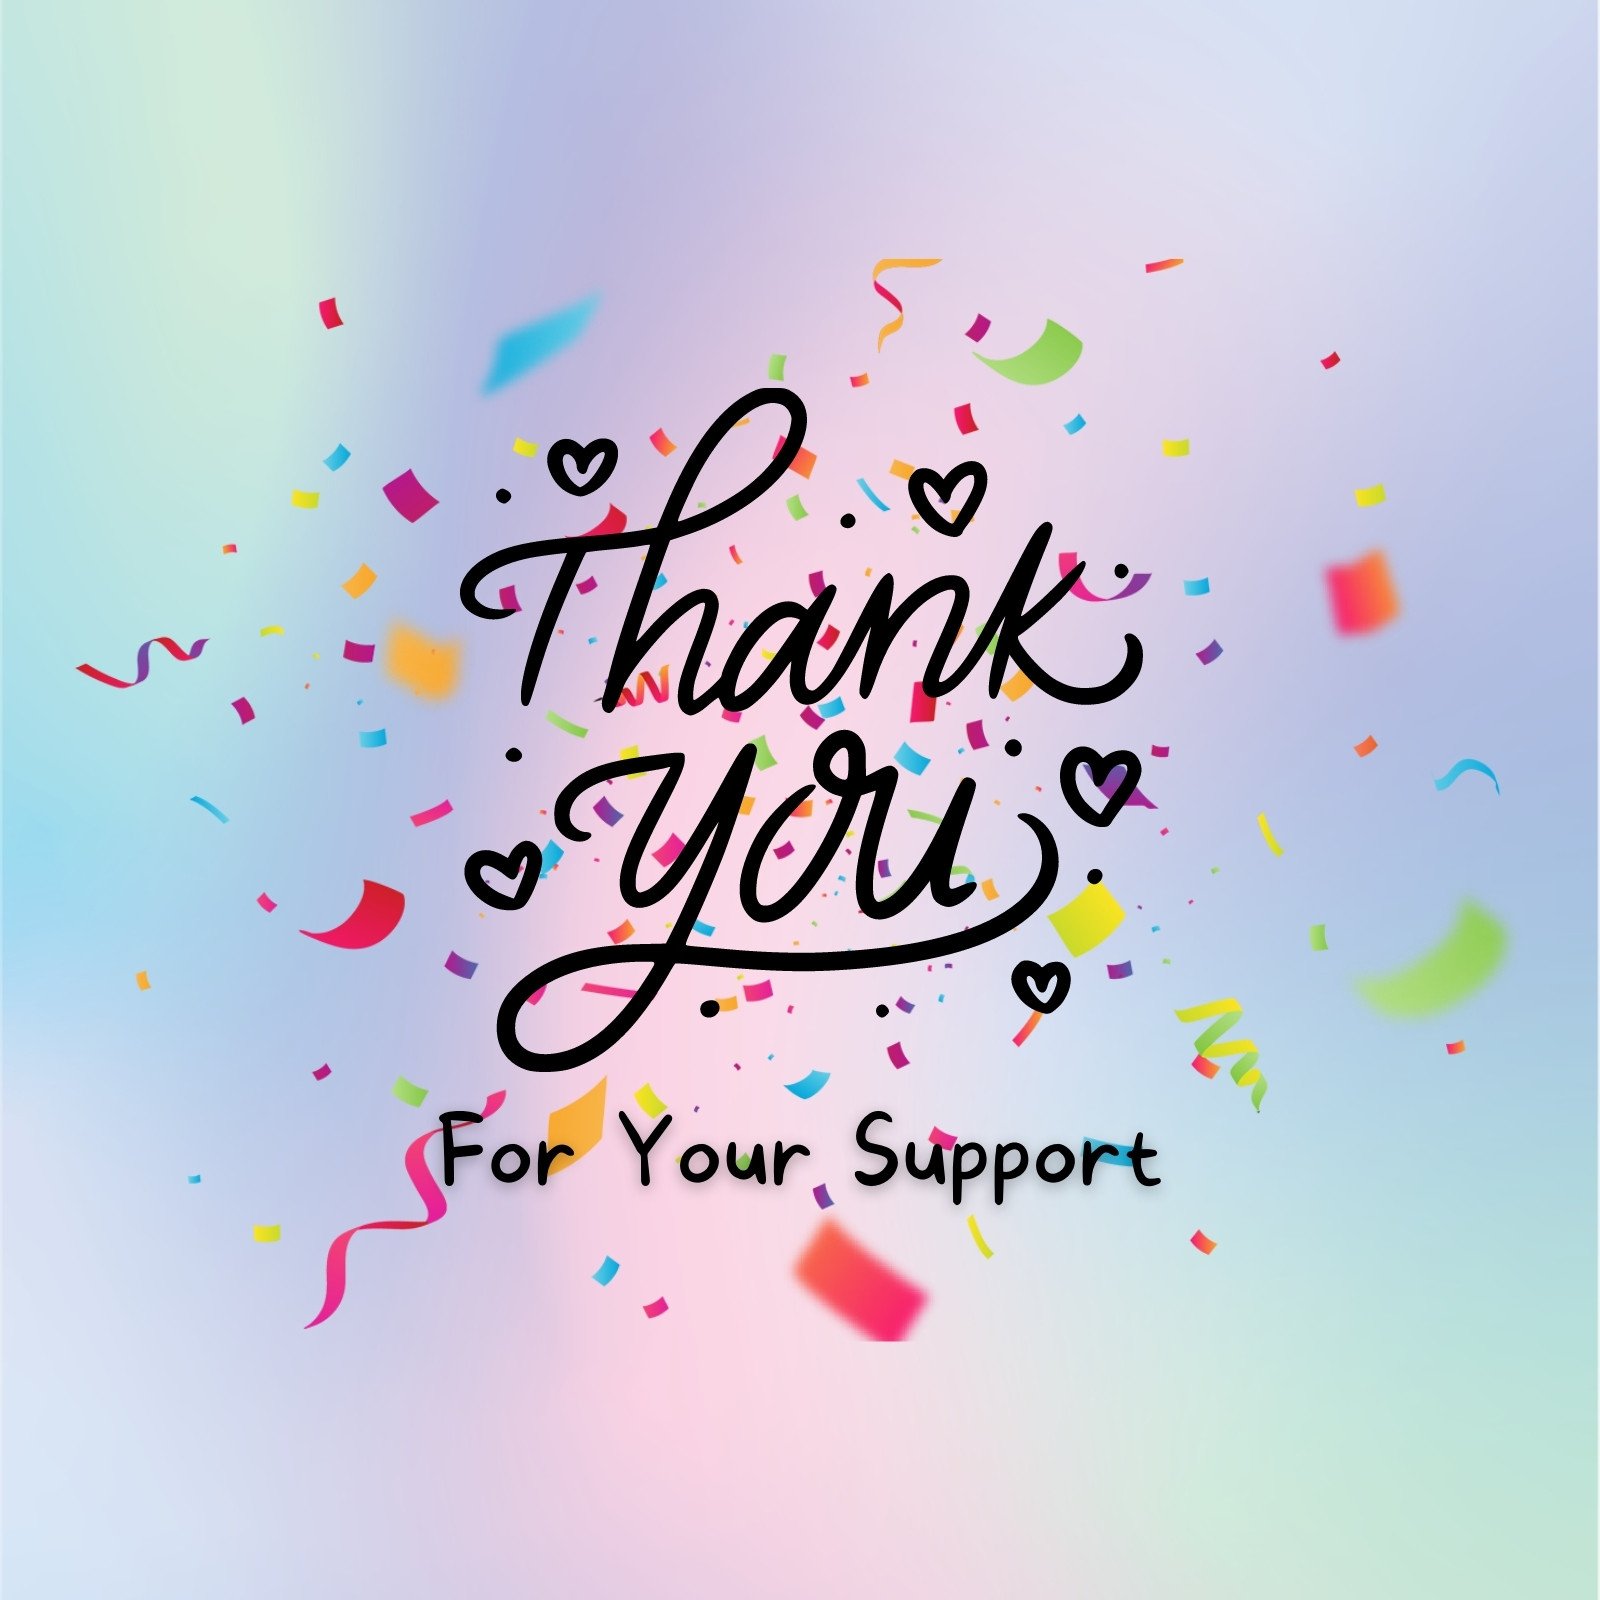 canva-thank-you-for-your-support--sQEc39YugI image